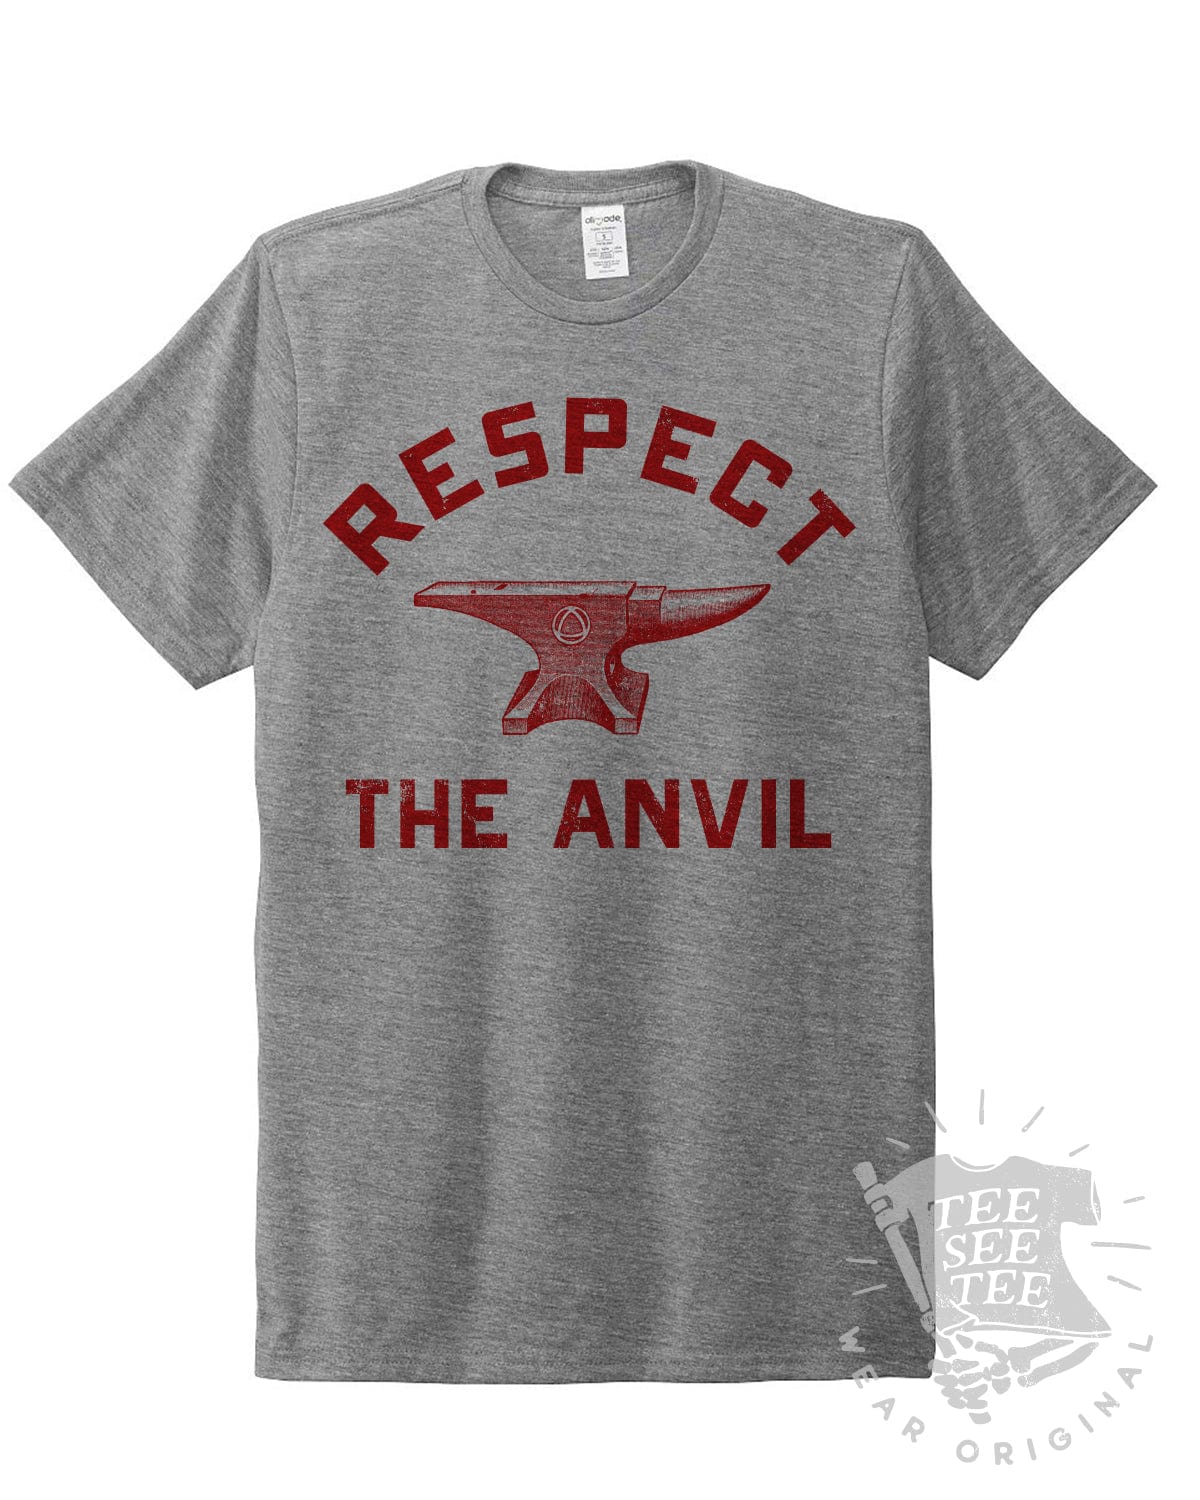 Workshop Merch Respect The Anvil Unisex T-Shirt Tee See Tee